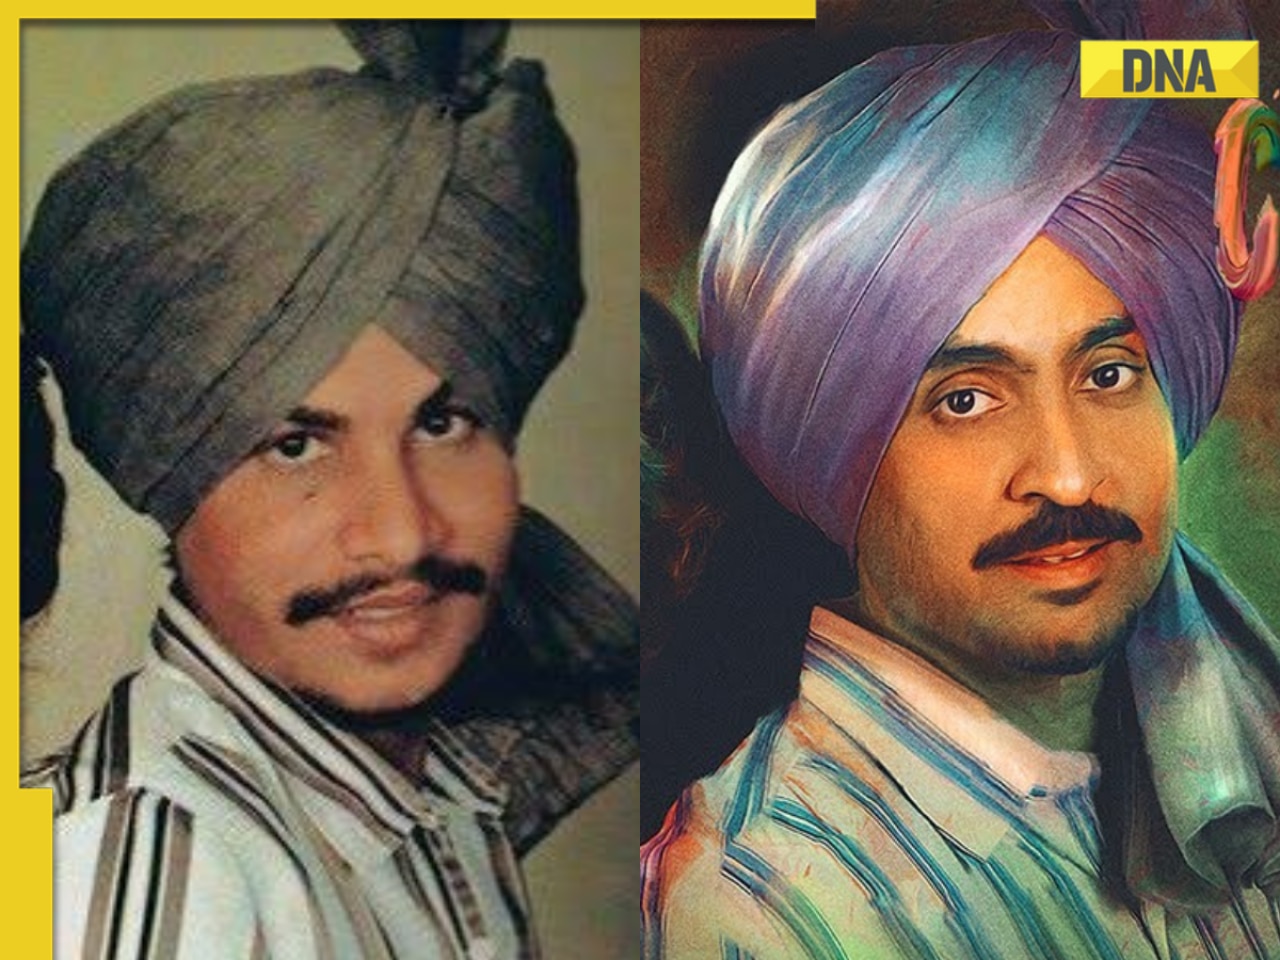 Who was the real Amar Singh Chamkila? Punjab's biggest star, accused of vulgarity, killed at 27, death remains unsolved